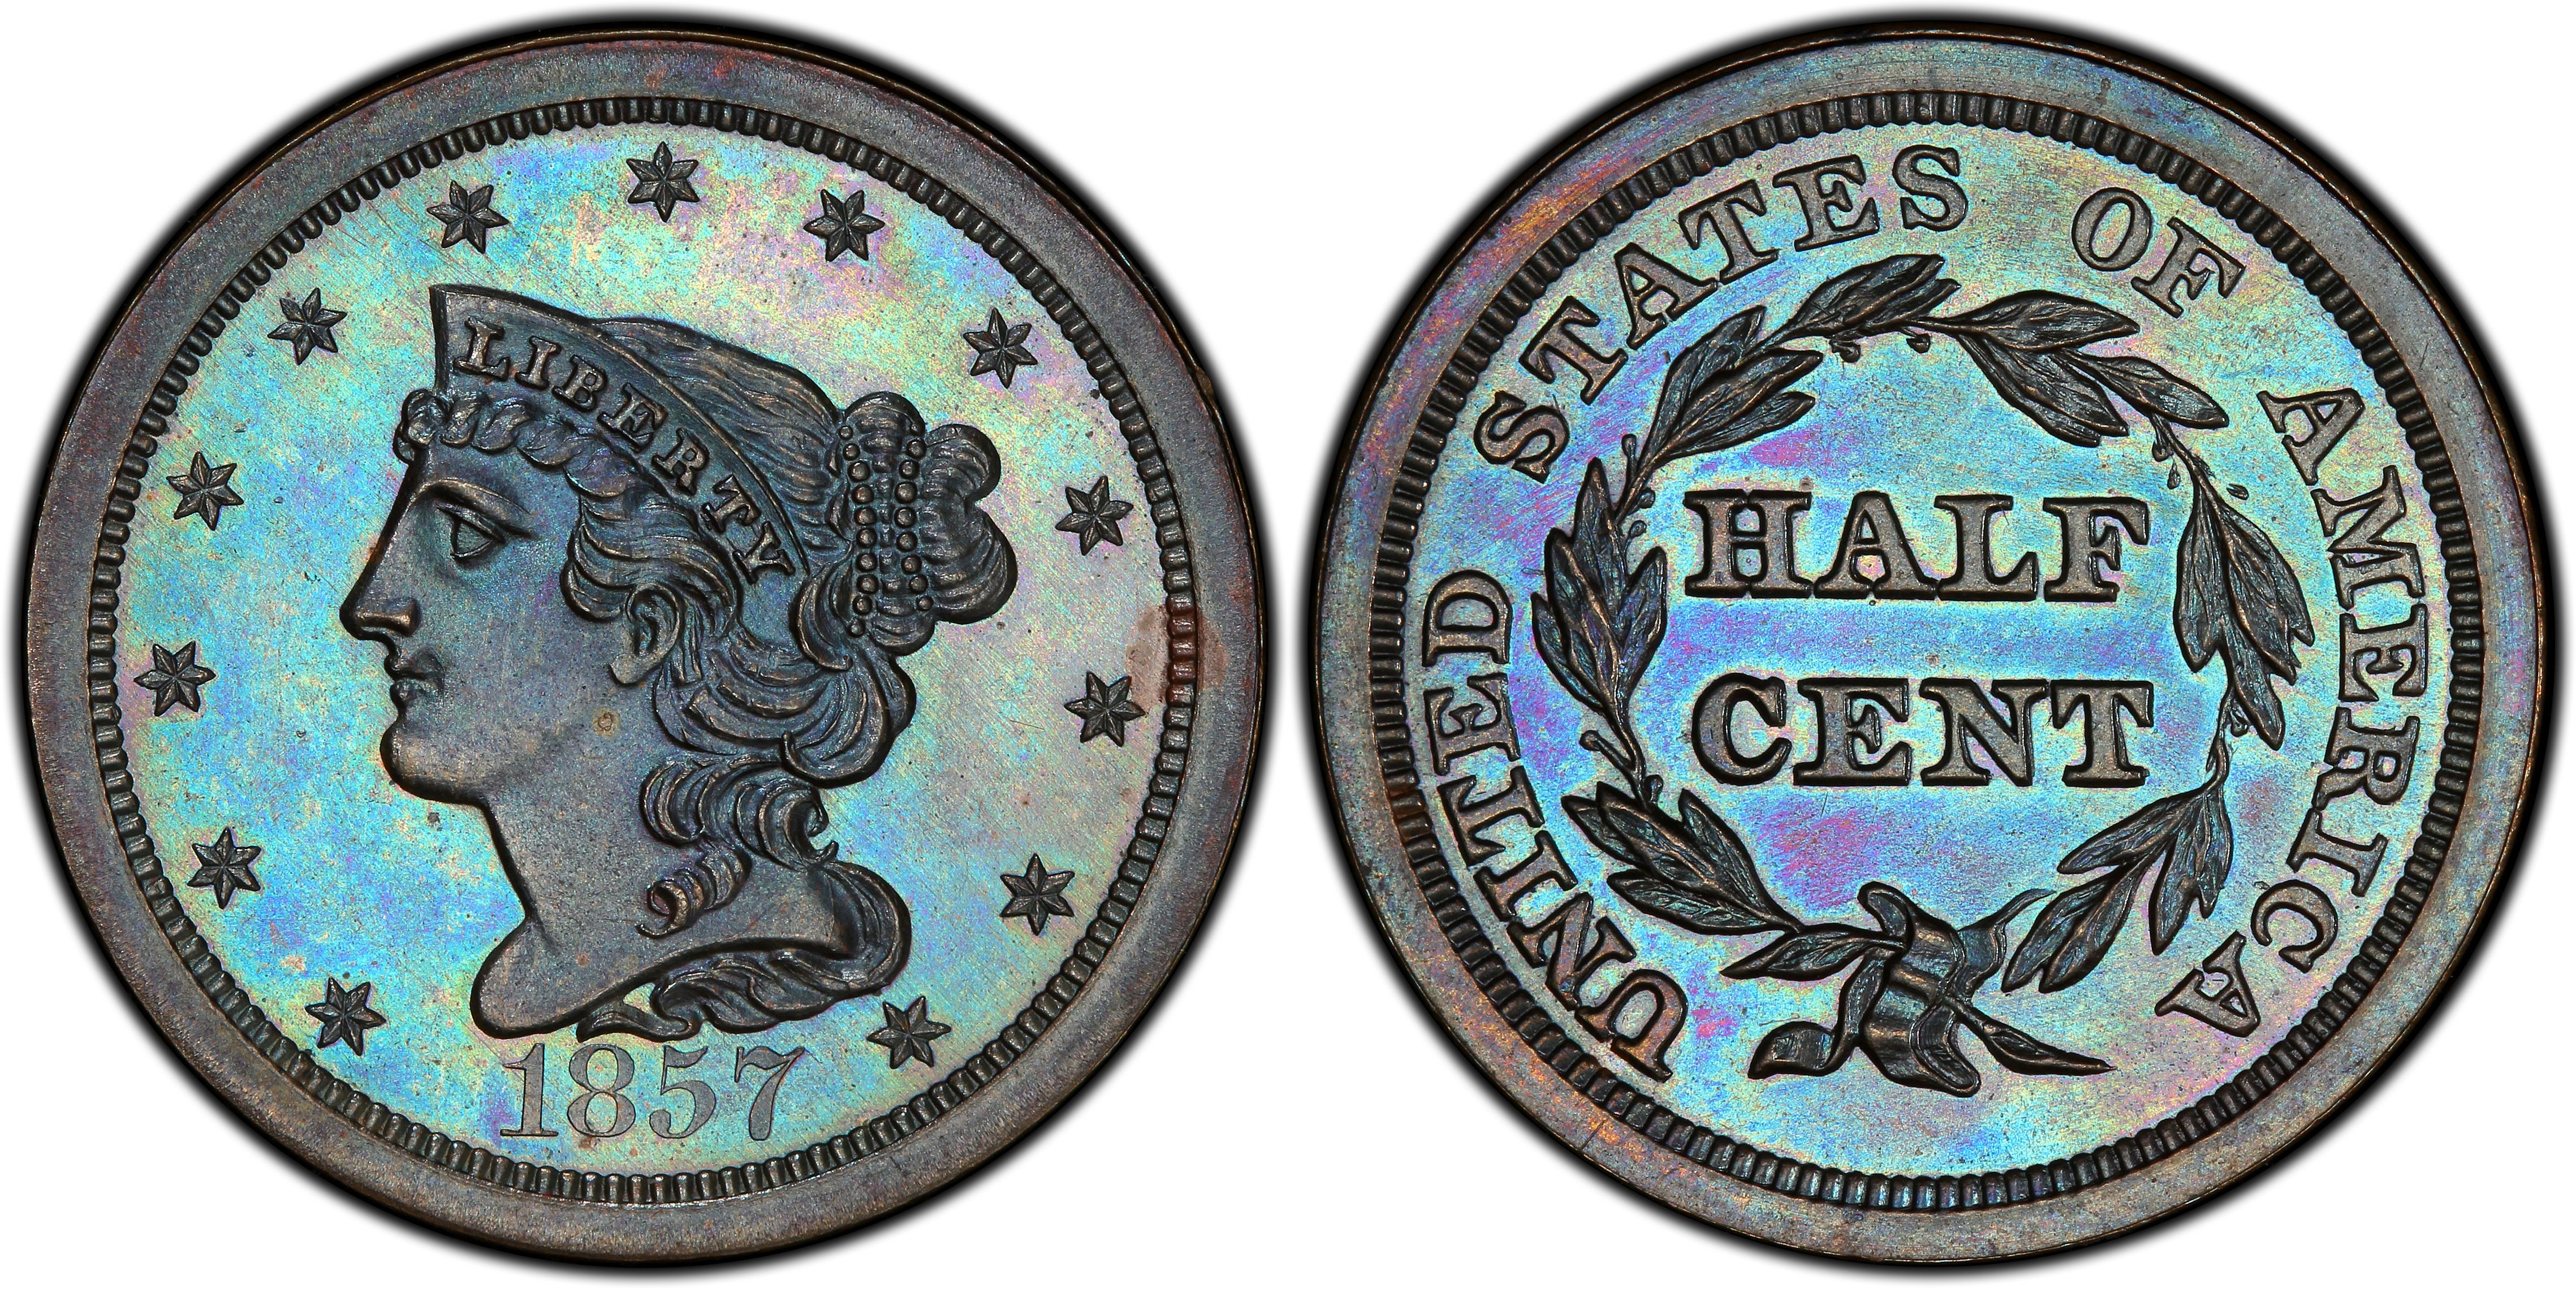 https://images.pcgs.com/CoinFacts/82913008_46161032_2200.jpg